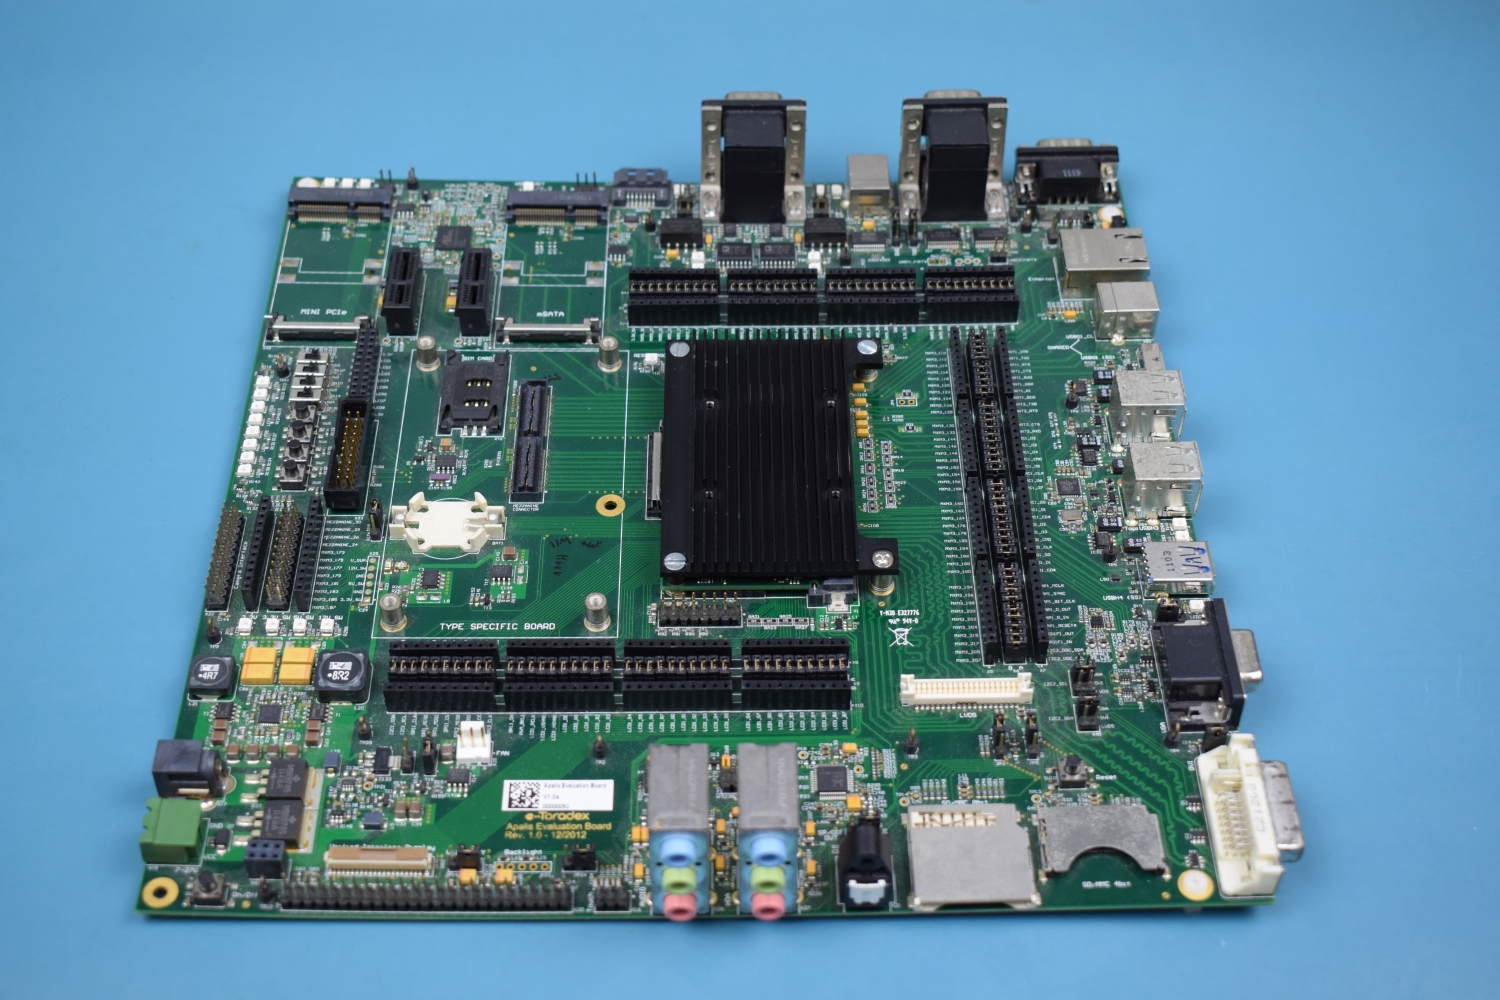 Apalis Heatsink attached to the Apalis Evaluation Board